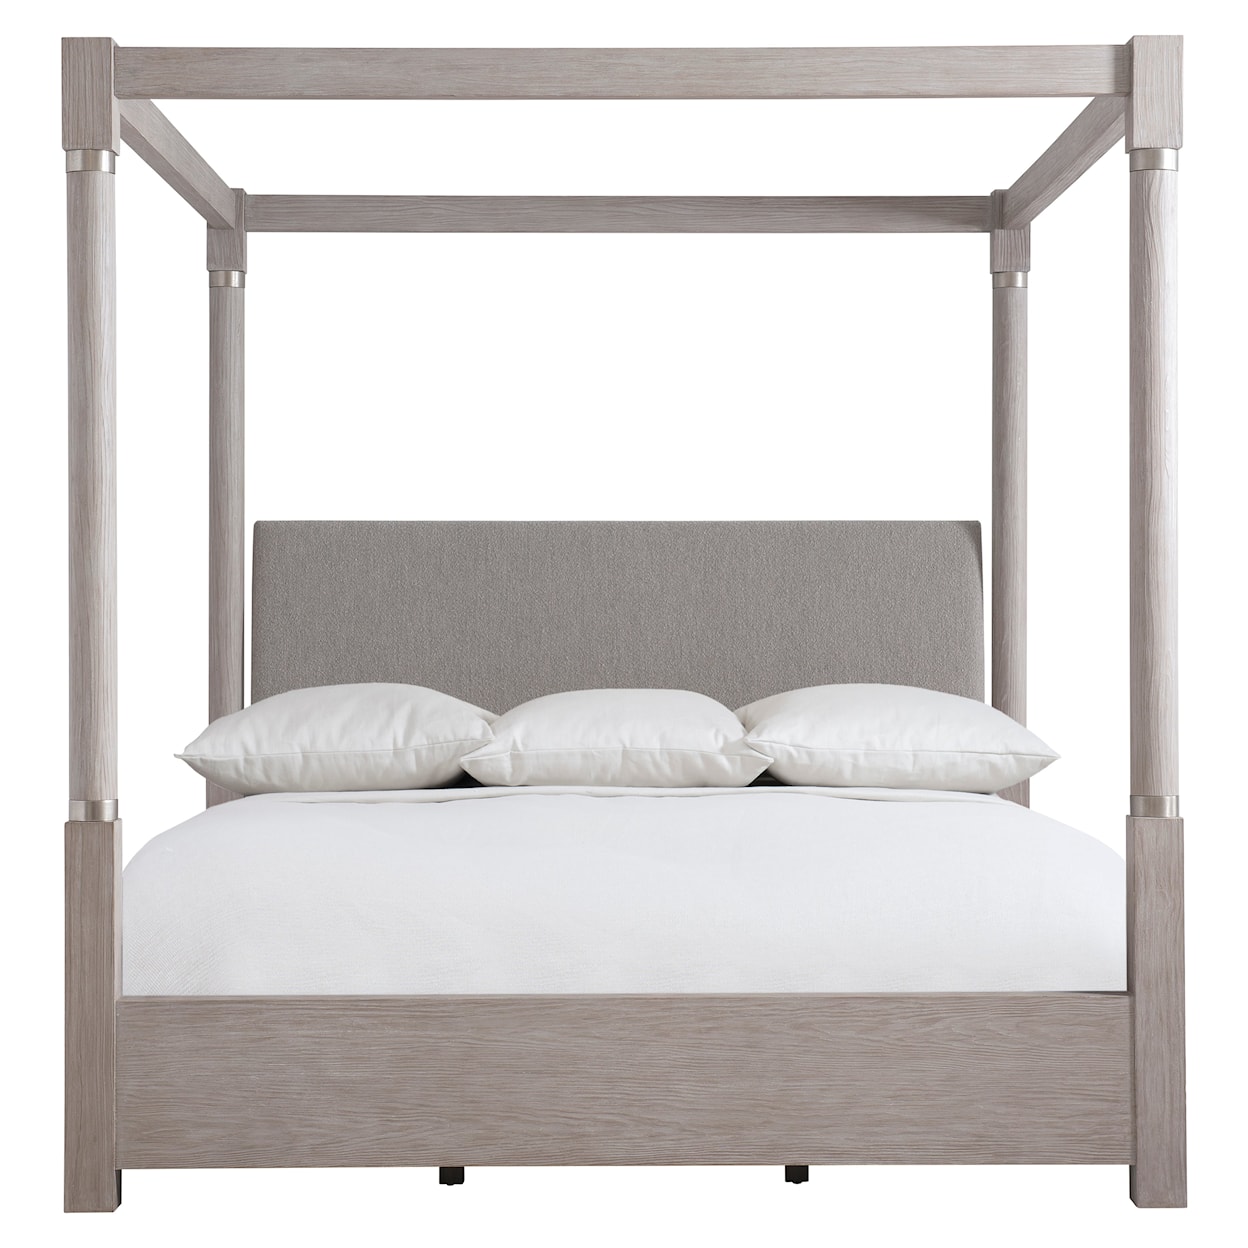 Bernhardt Trianon King Canopy Bed